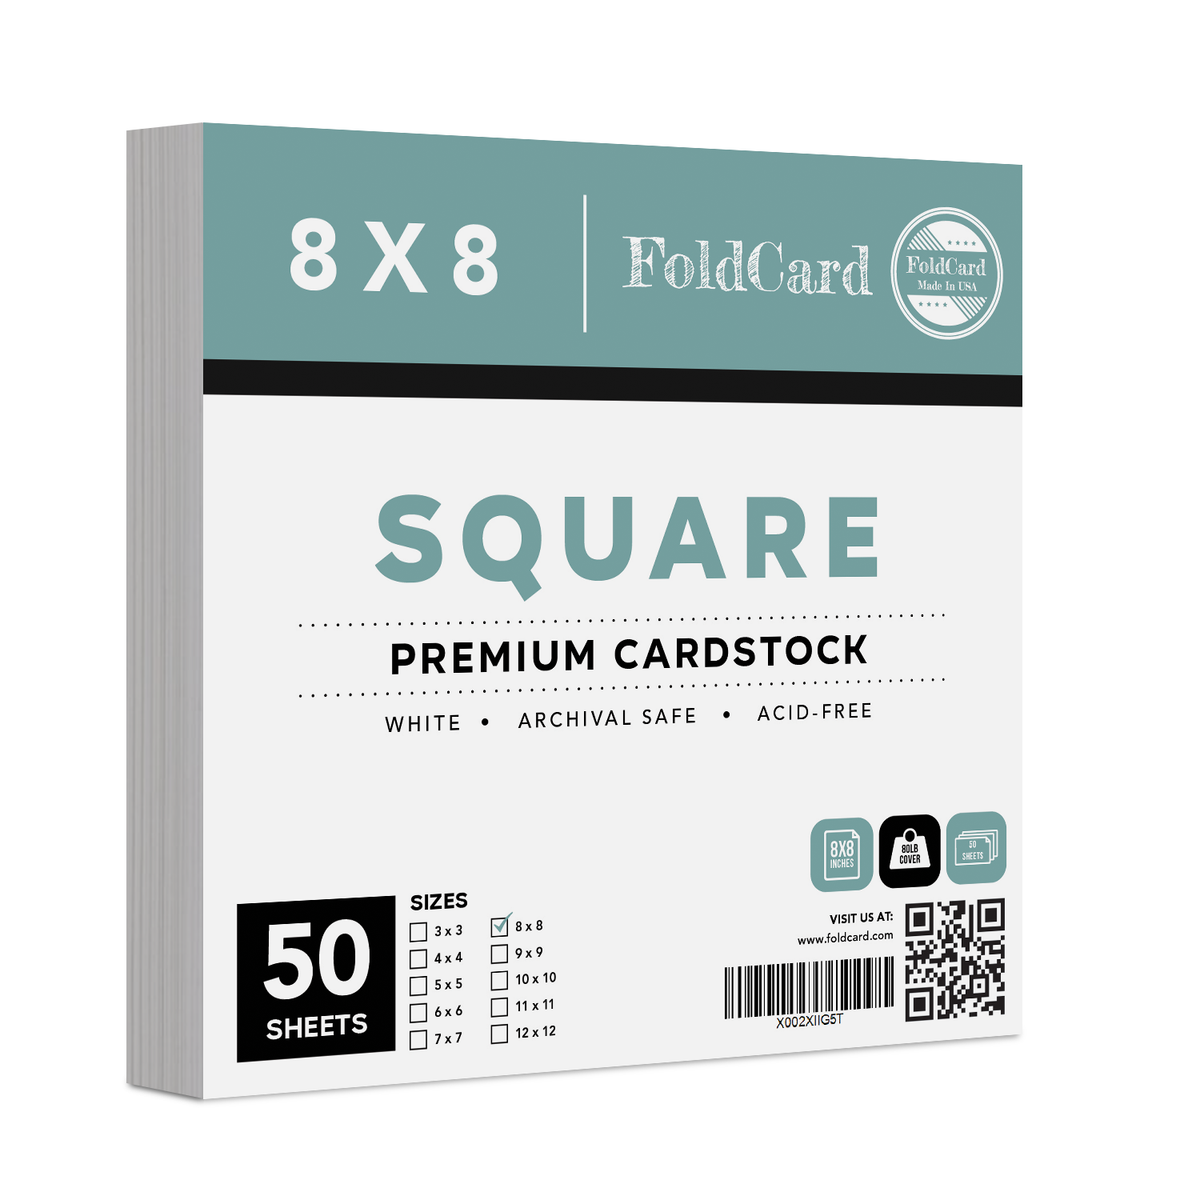 High-Quality White Square Cardstock 80 LB Cover, 8” x 8”, 50 Sheets Per pack.